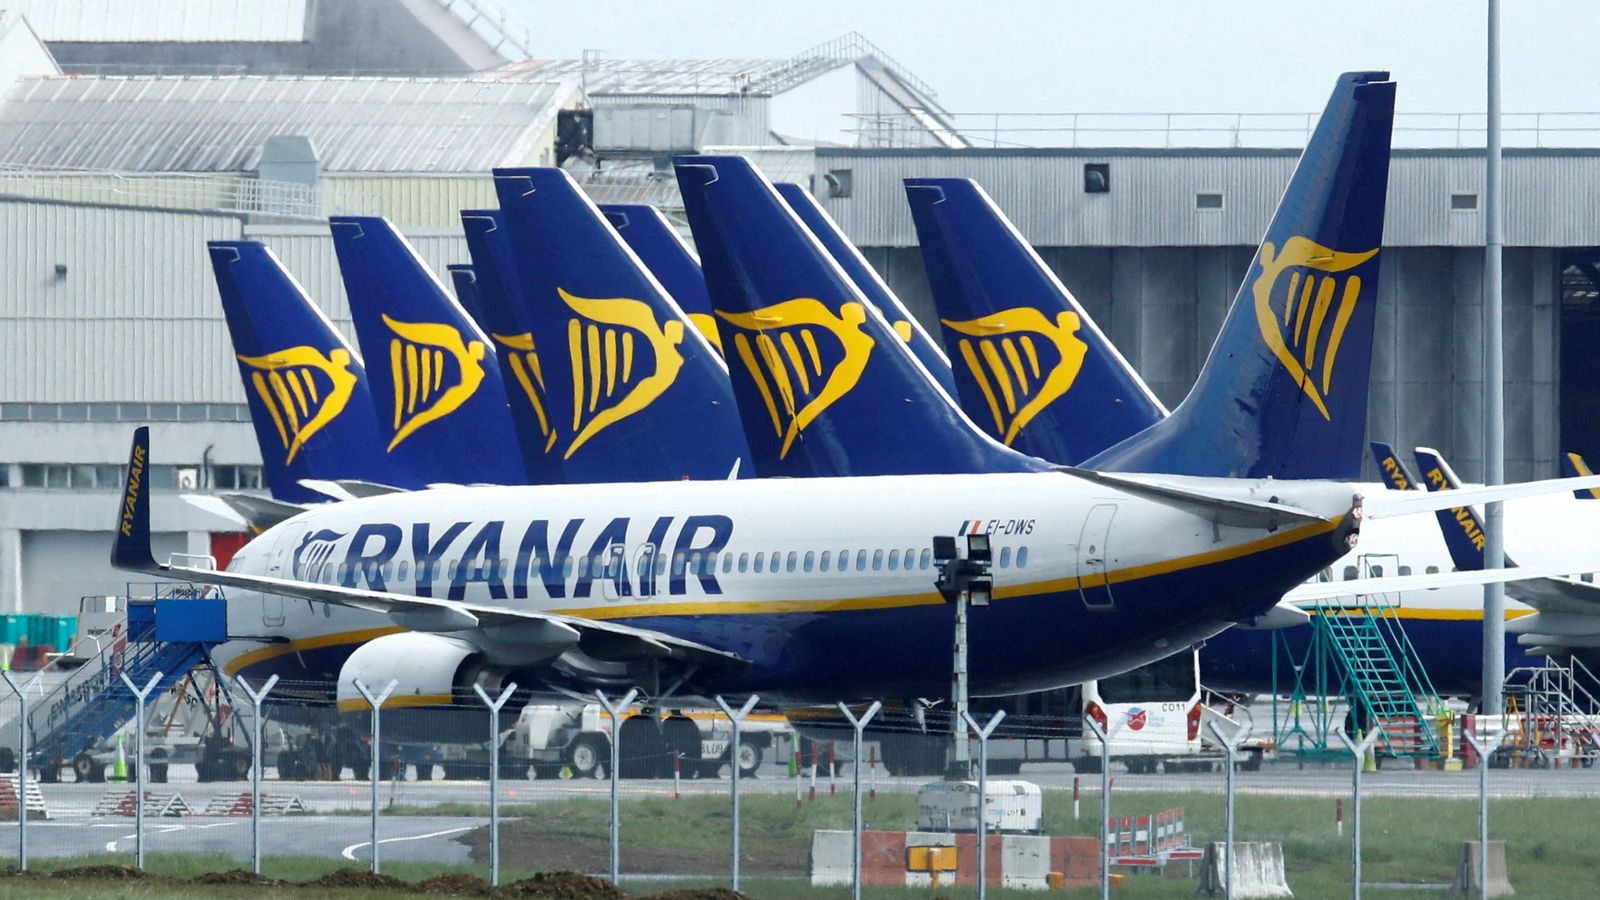 Ryanair flights could become up to 15% more expensive, Michael O'Leary says